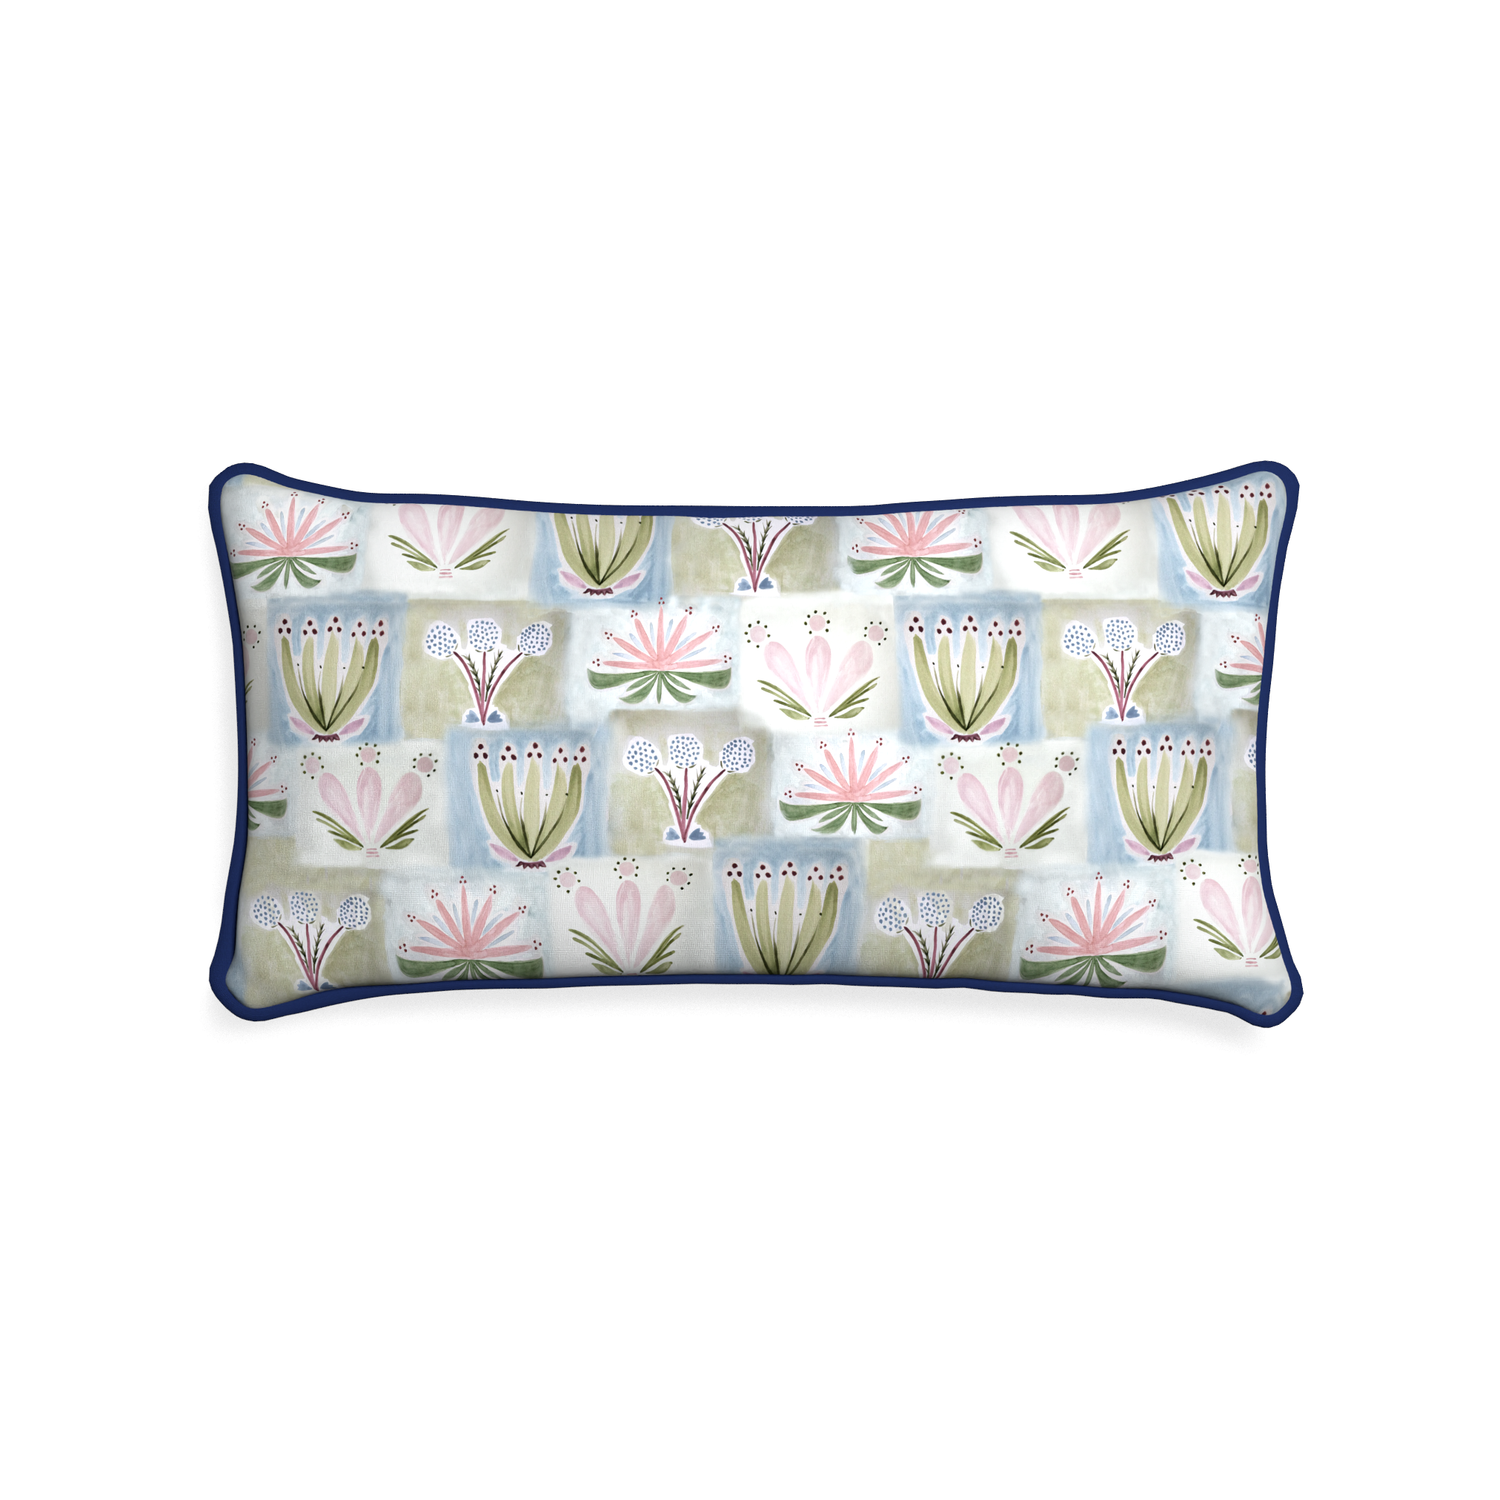 Midi-lumbar harper custom hand-painted floralpillow with midnight piping on white background